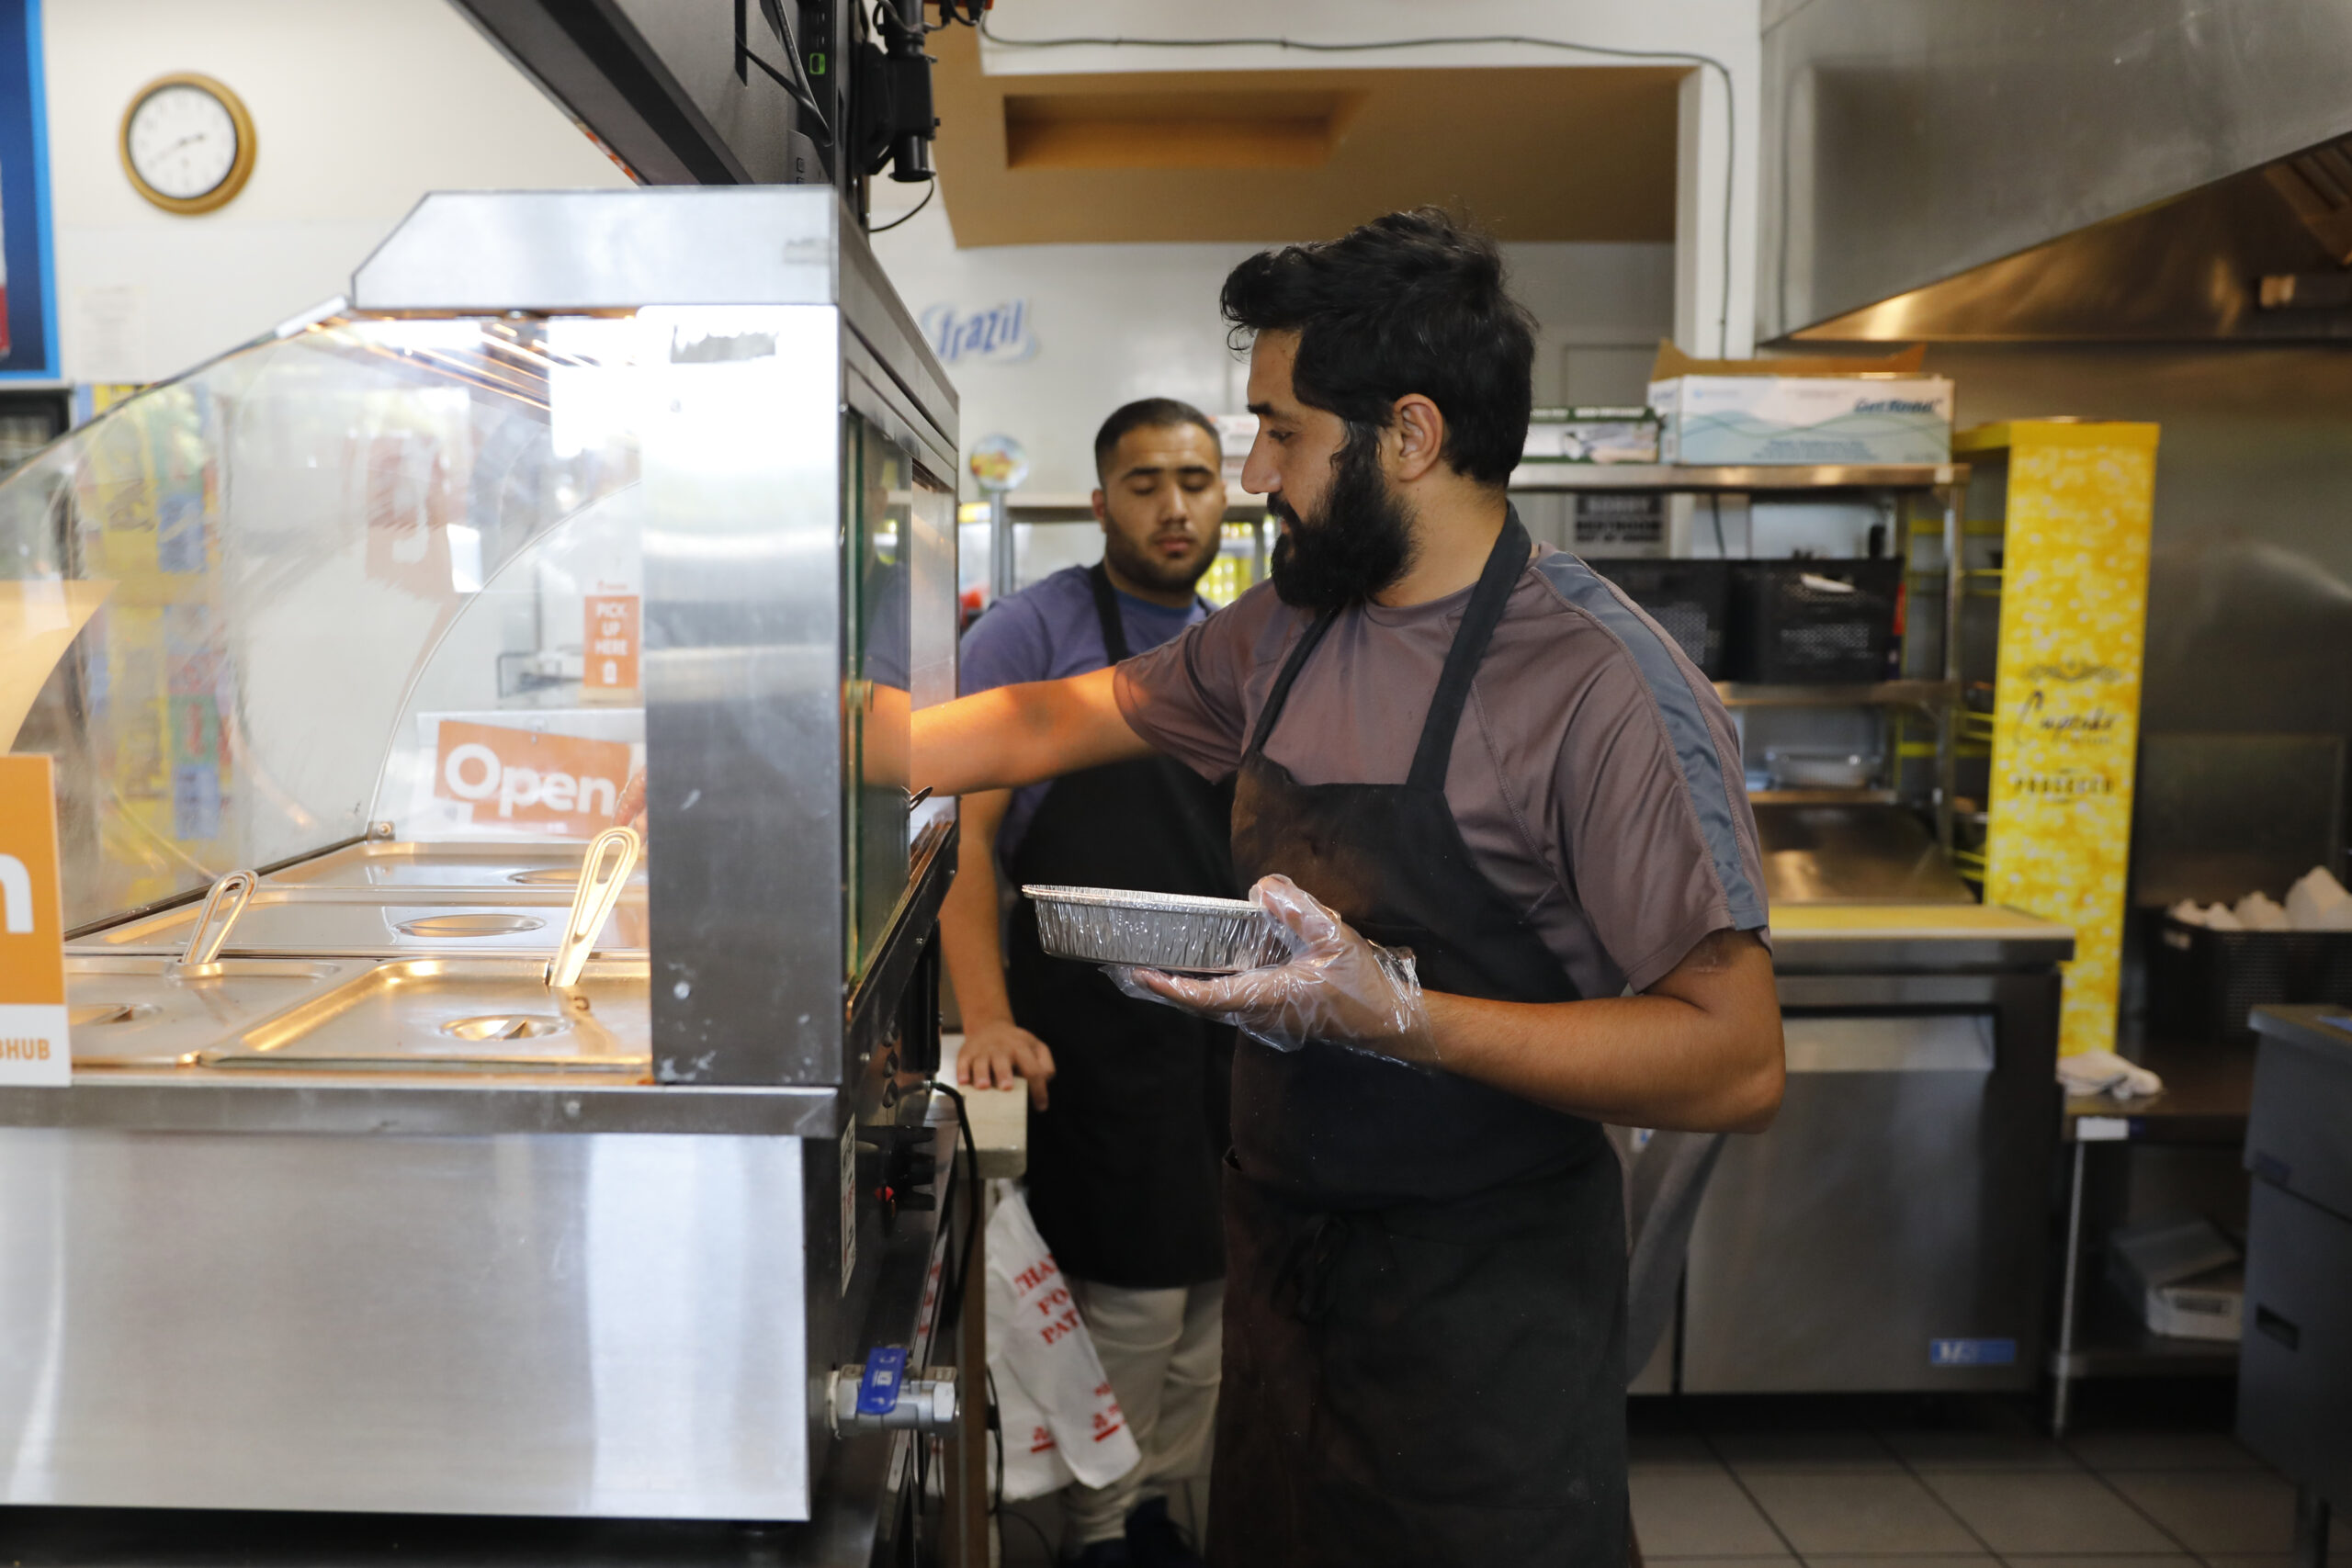 Roman Zemari and his brother Suliman Dawood, rear, cook at ZamZam in Santa Rosa, Calif. on Monday, July 25, 2022. (Beth Schlanker/The Press Democrat)